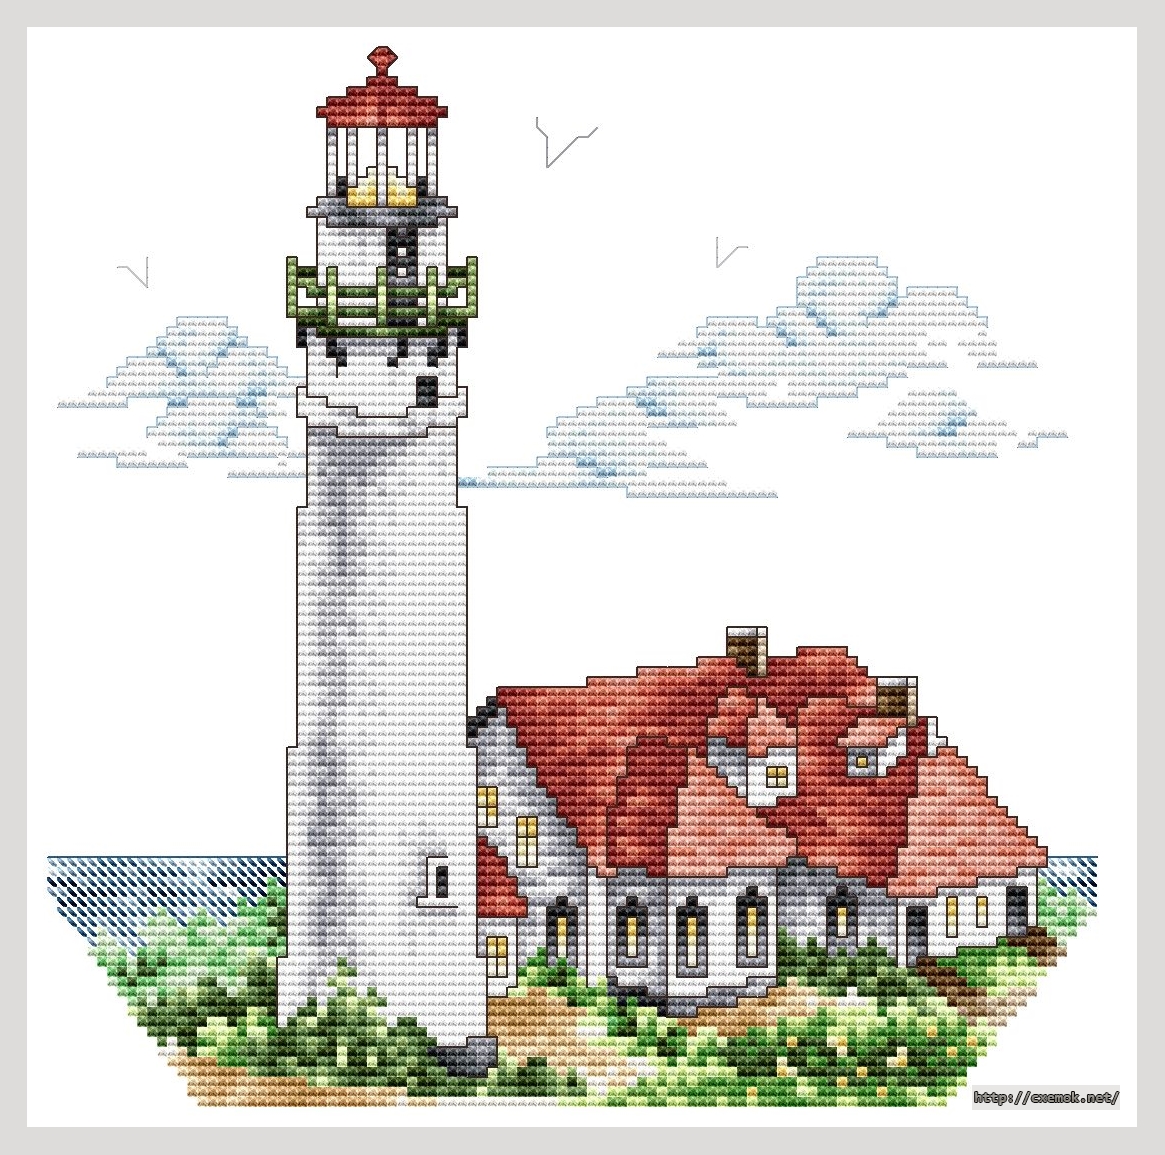 Download embroidery patterns by cross-stitch  - West quoddy head maine, author 